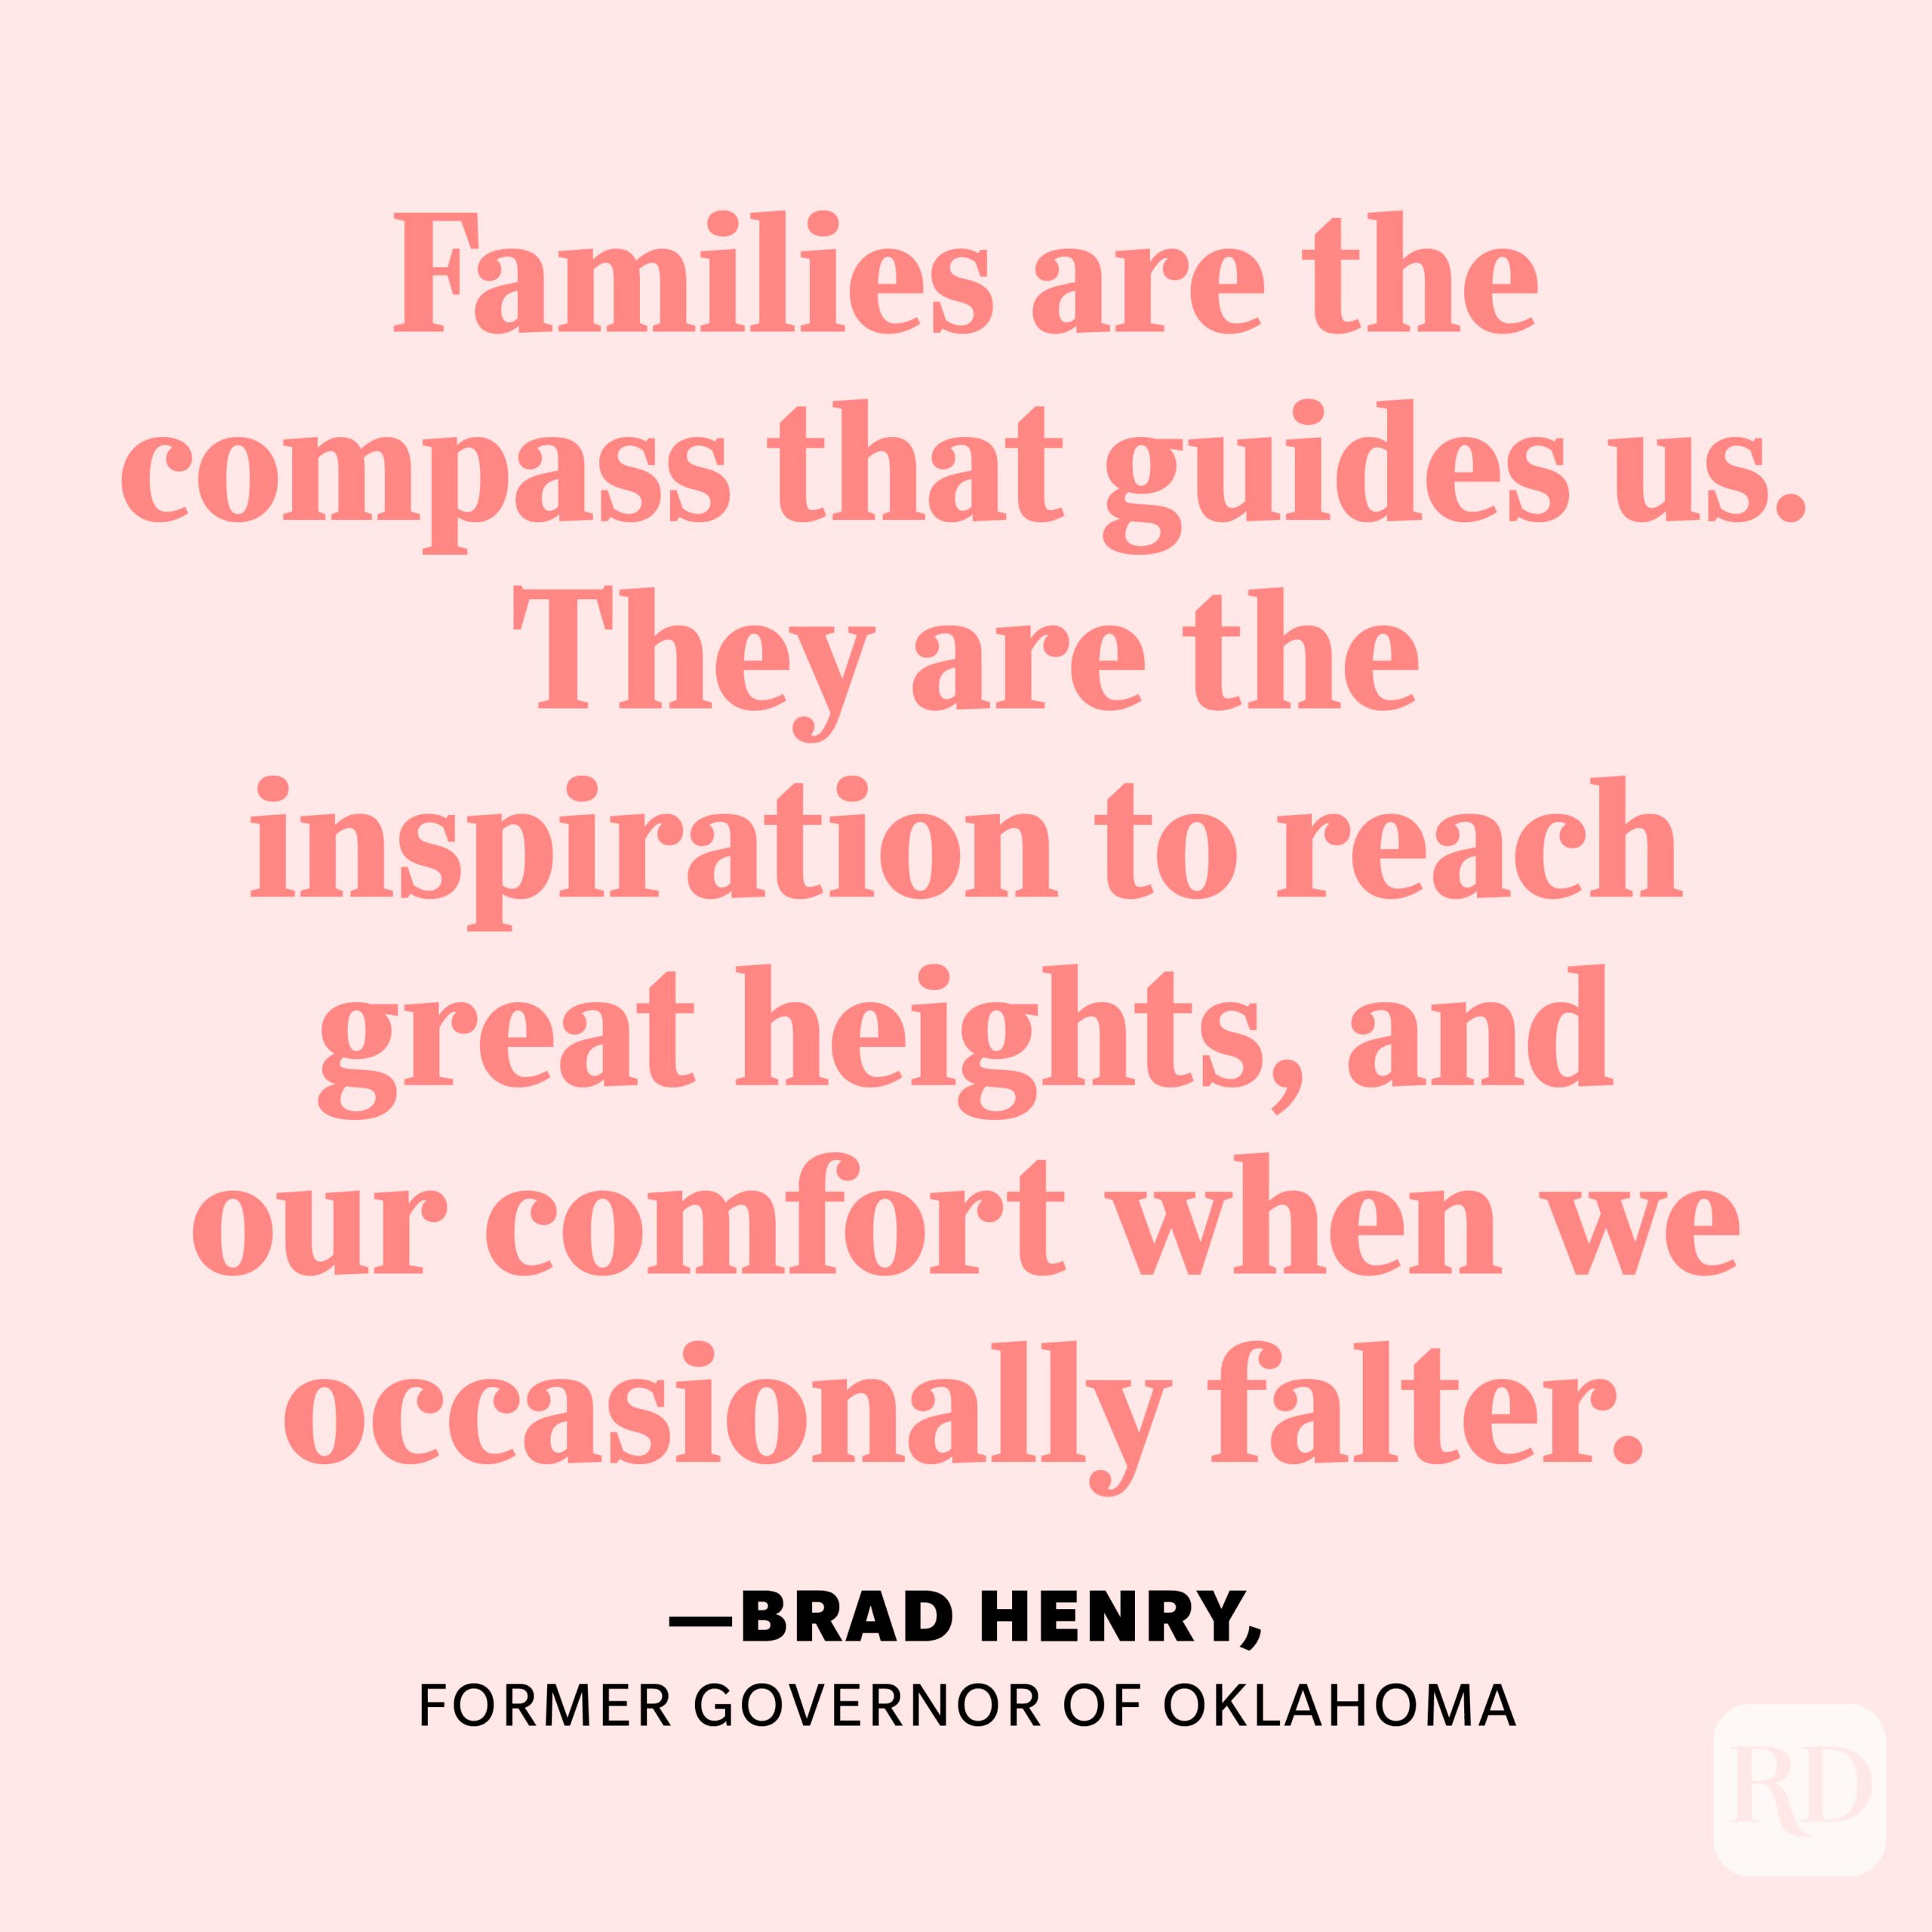 "Families are the compass that guides us. They are the inspiration to reach great heights, and our comfort when we occasionally falter." —Brad Henry, former governor of Oklahoma.